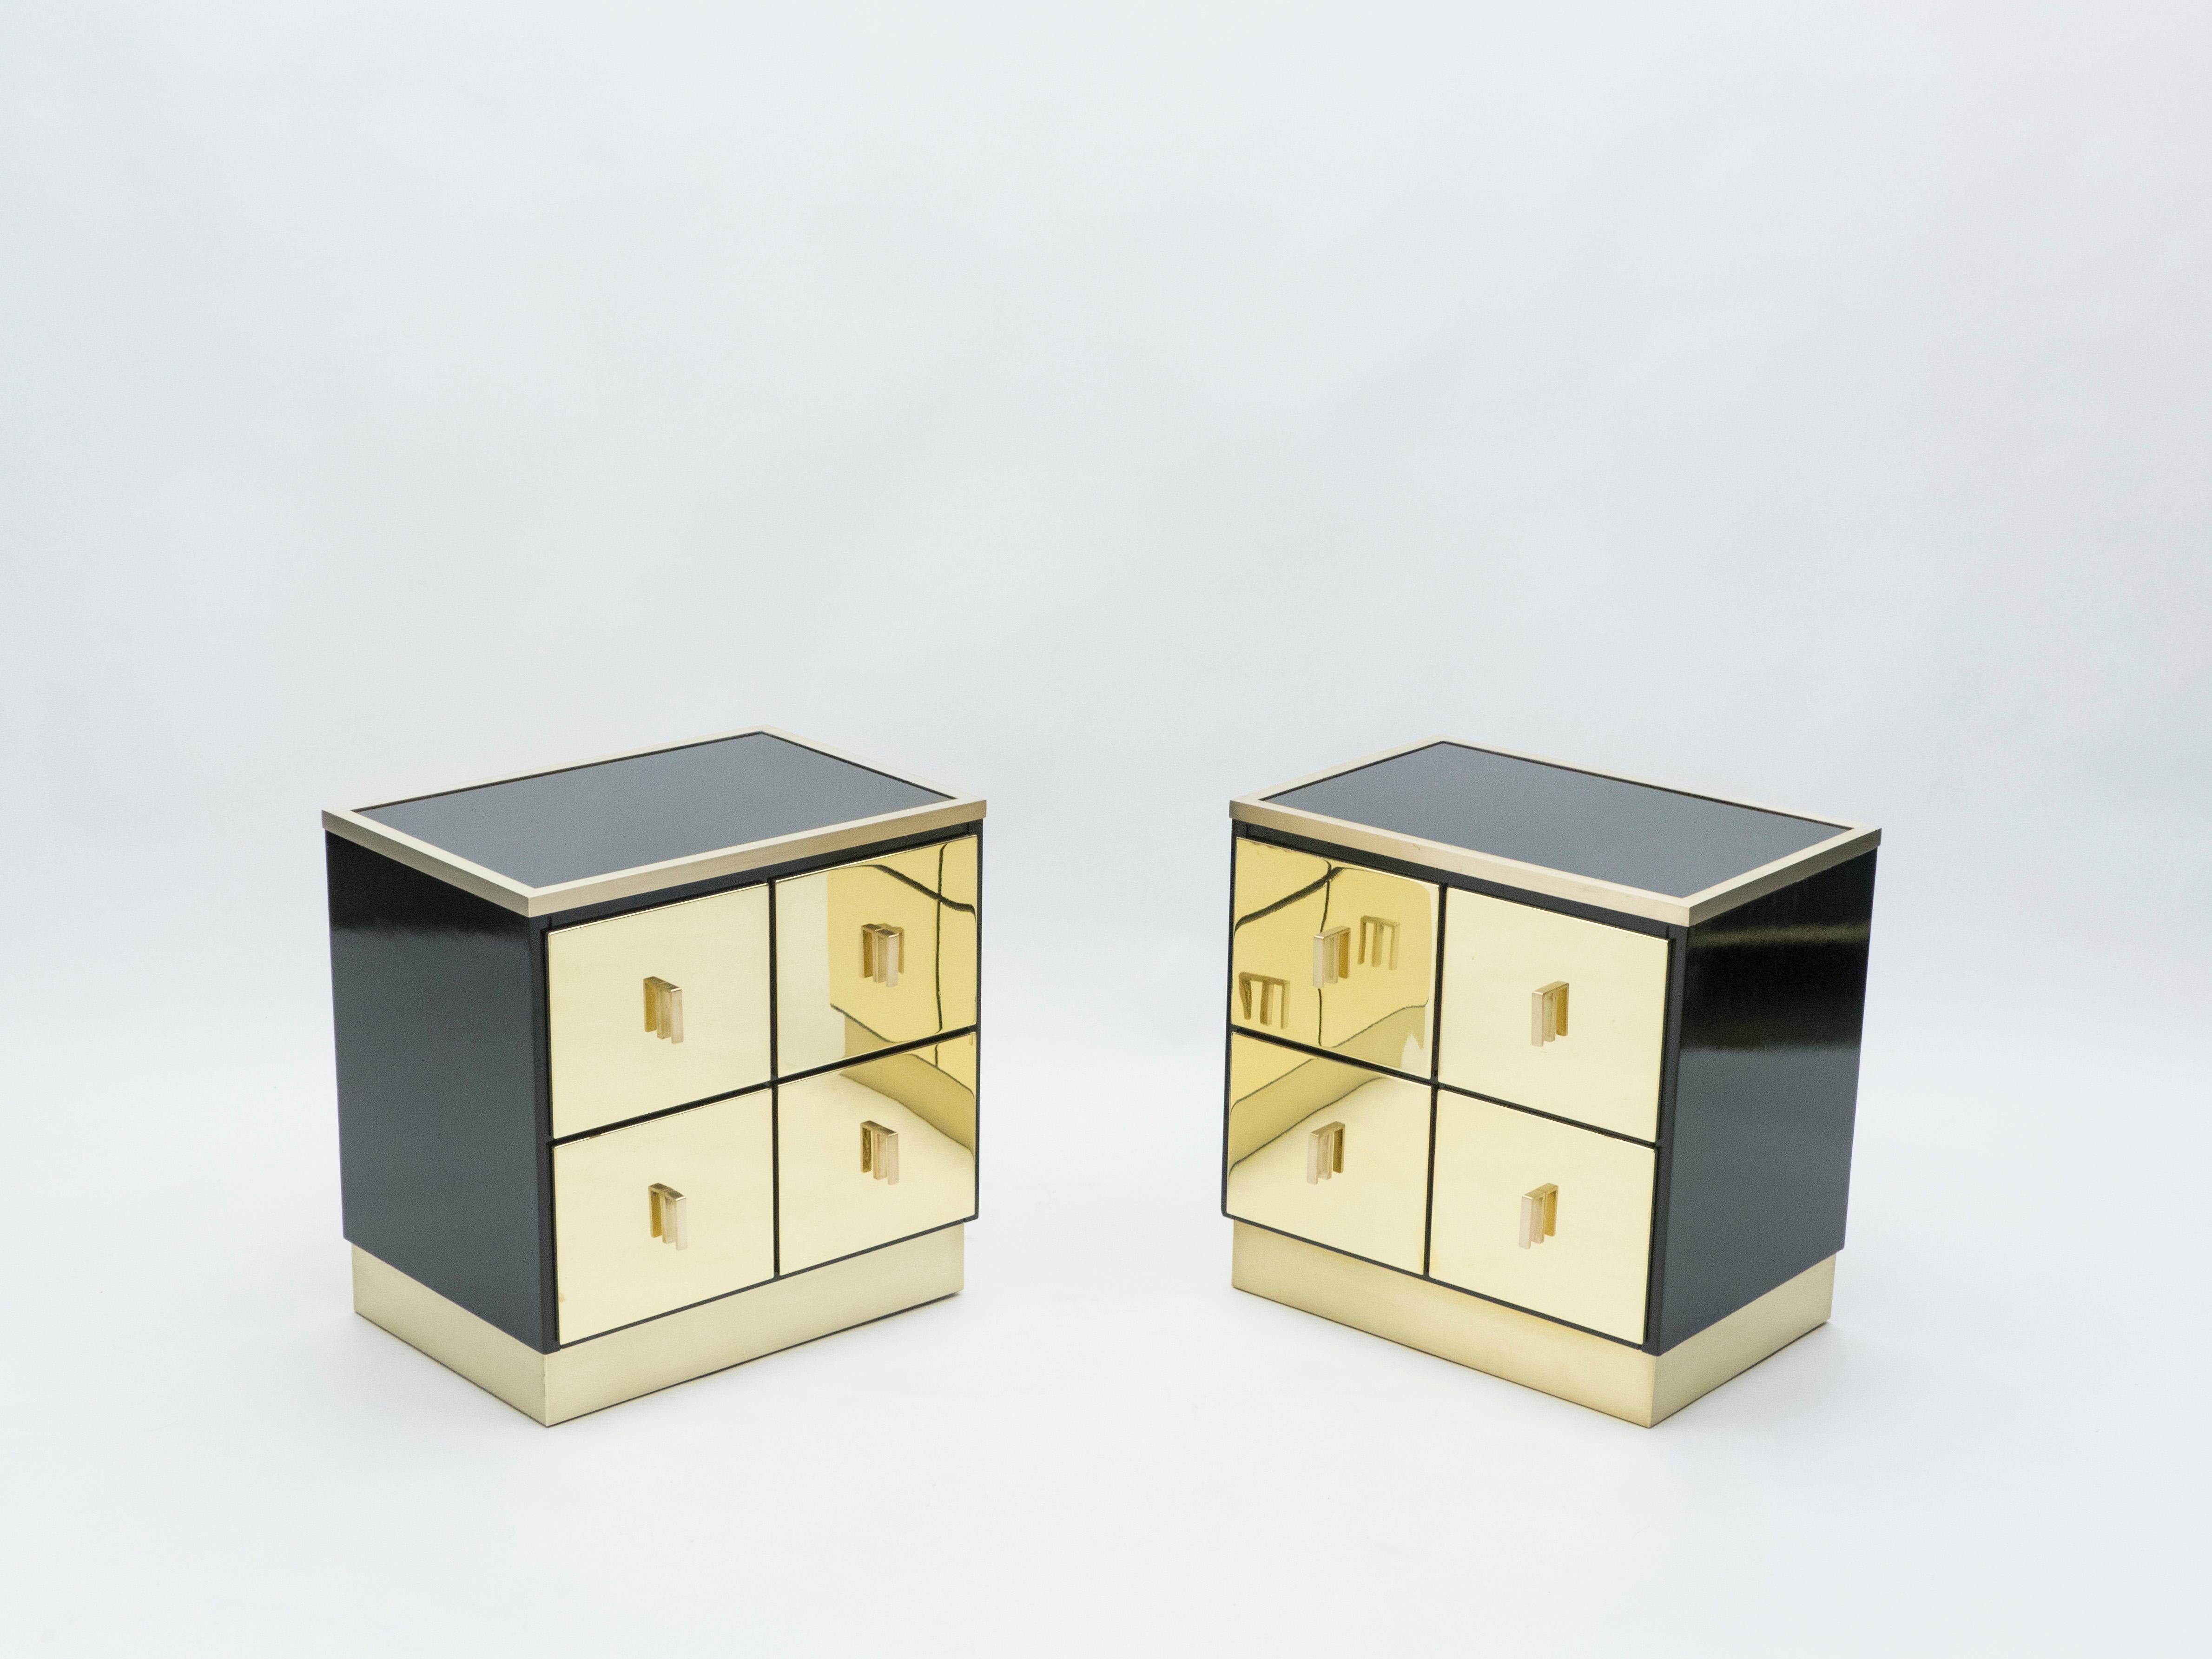 This rare pair of Italian midcentury two drawers black lacquered nightstands or end tables would be stunning in any room. Designed by Luciano Frigerio for Frigerio Di Desio in Italy in the early 1970s, the shiny black lacquer paired with the mix of